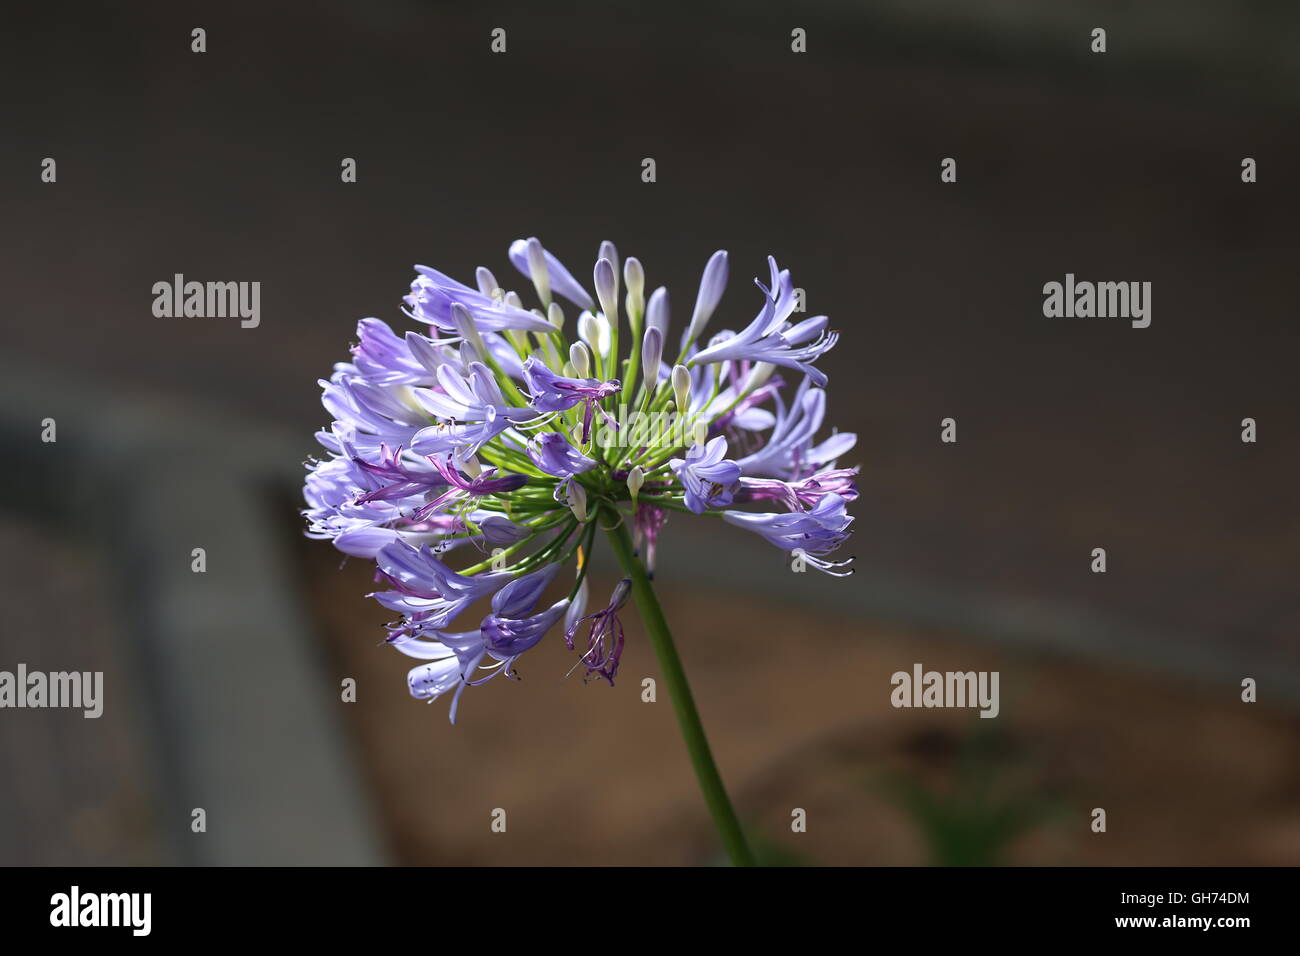 African Lily Flower. Blue - purple flower of Agapanthus africanus, commonly called lily of the Nile. Bright light of natural  spotlight on the flowers Stock Photo